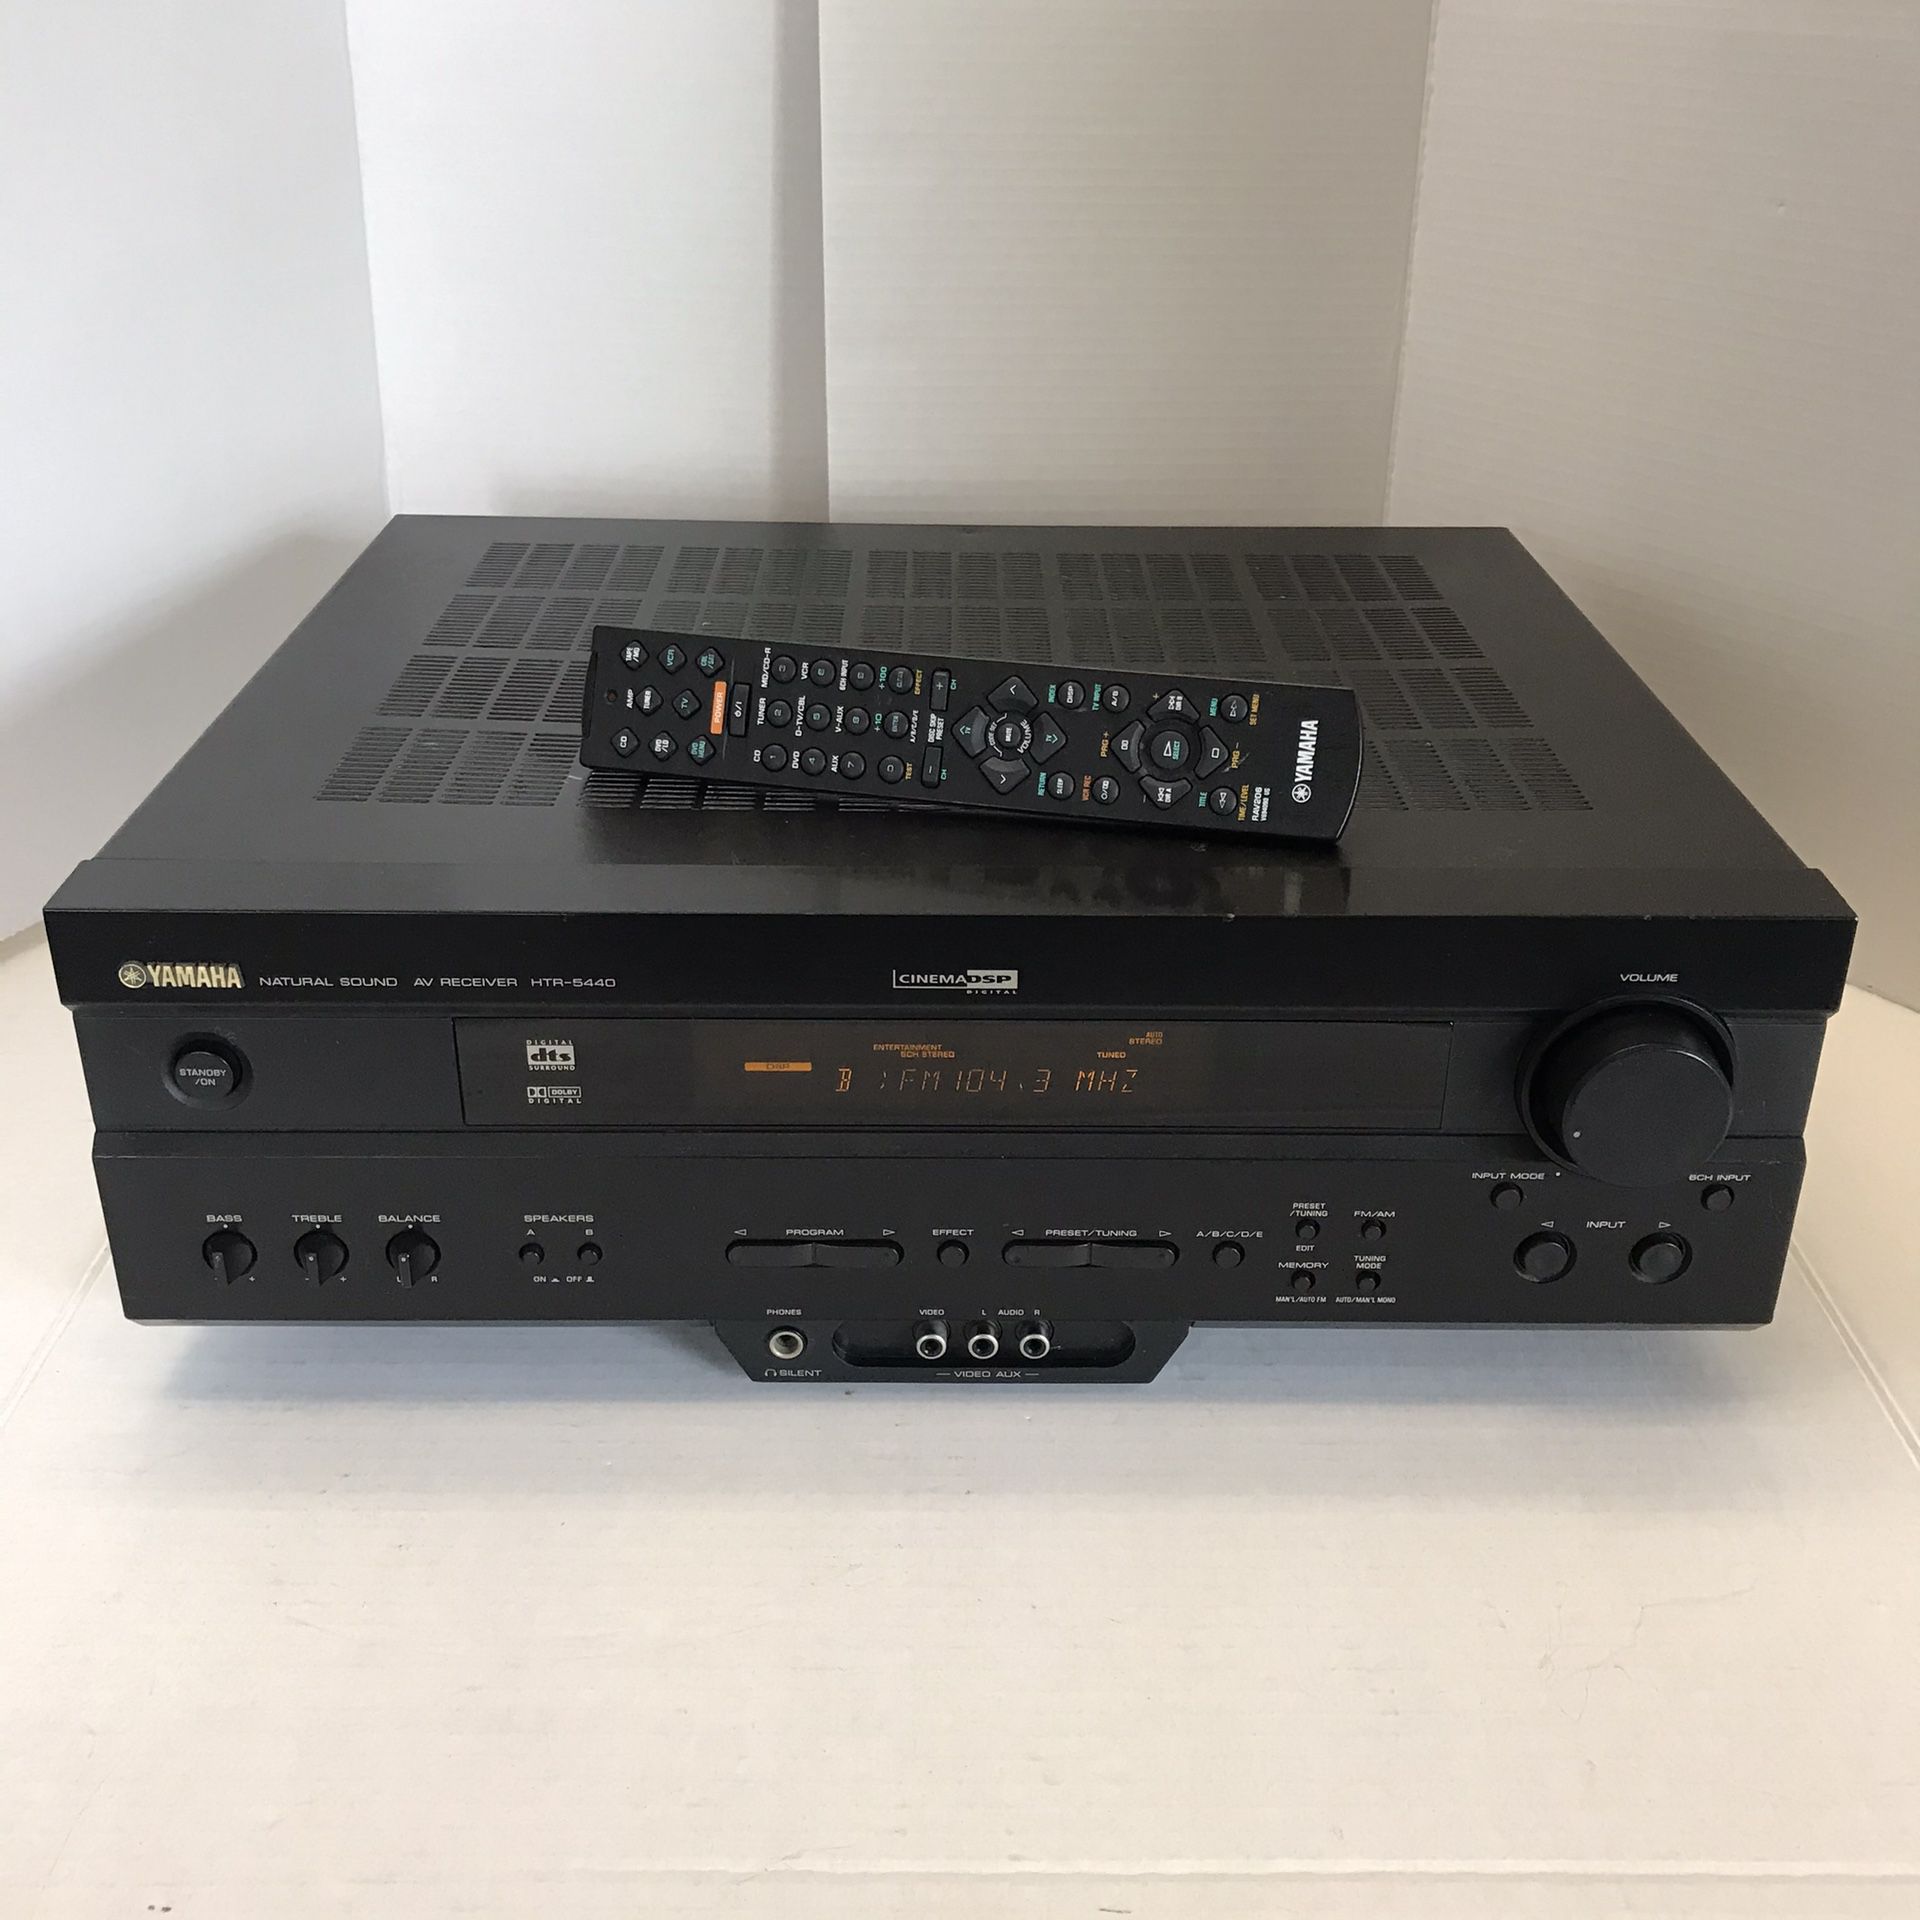 Yamaha 5.1 Stereo Receiver! HTR-5440 Natural Sound Home Theater AM/FM/Dolby Digital/DTS Receiver! Works Great! Comes With The Remote!